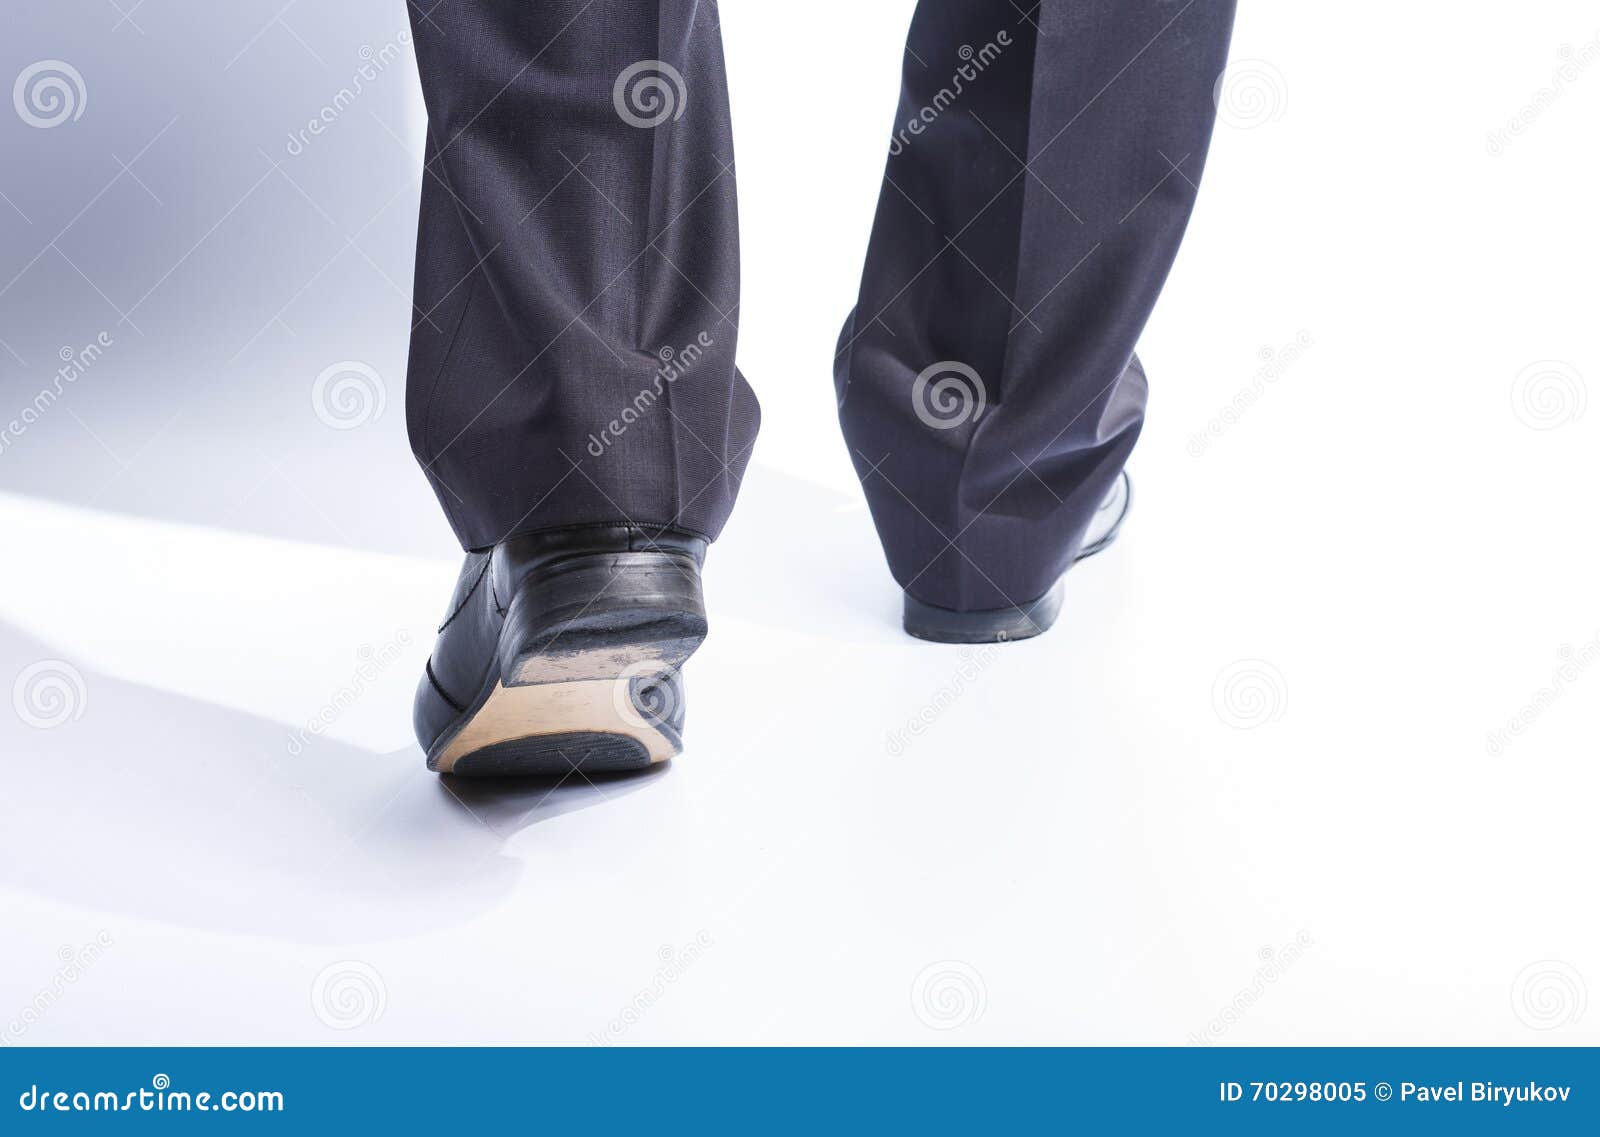 Man's Legs In Classic Suit And Leather Shoes Stock Image - Image of ...